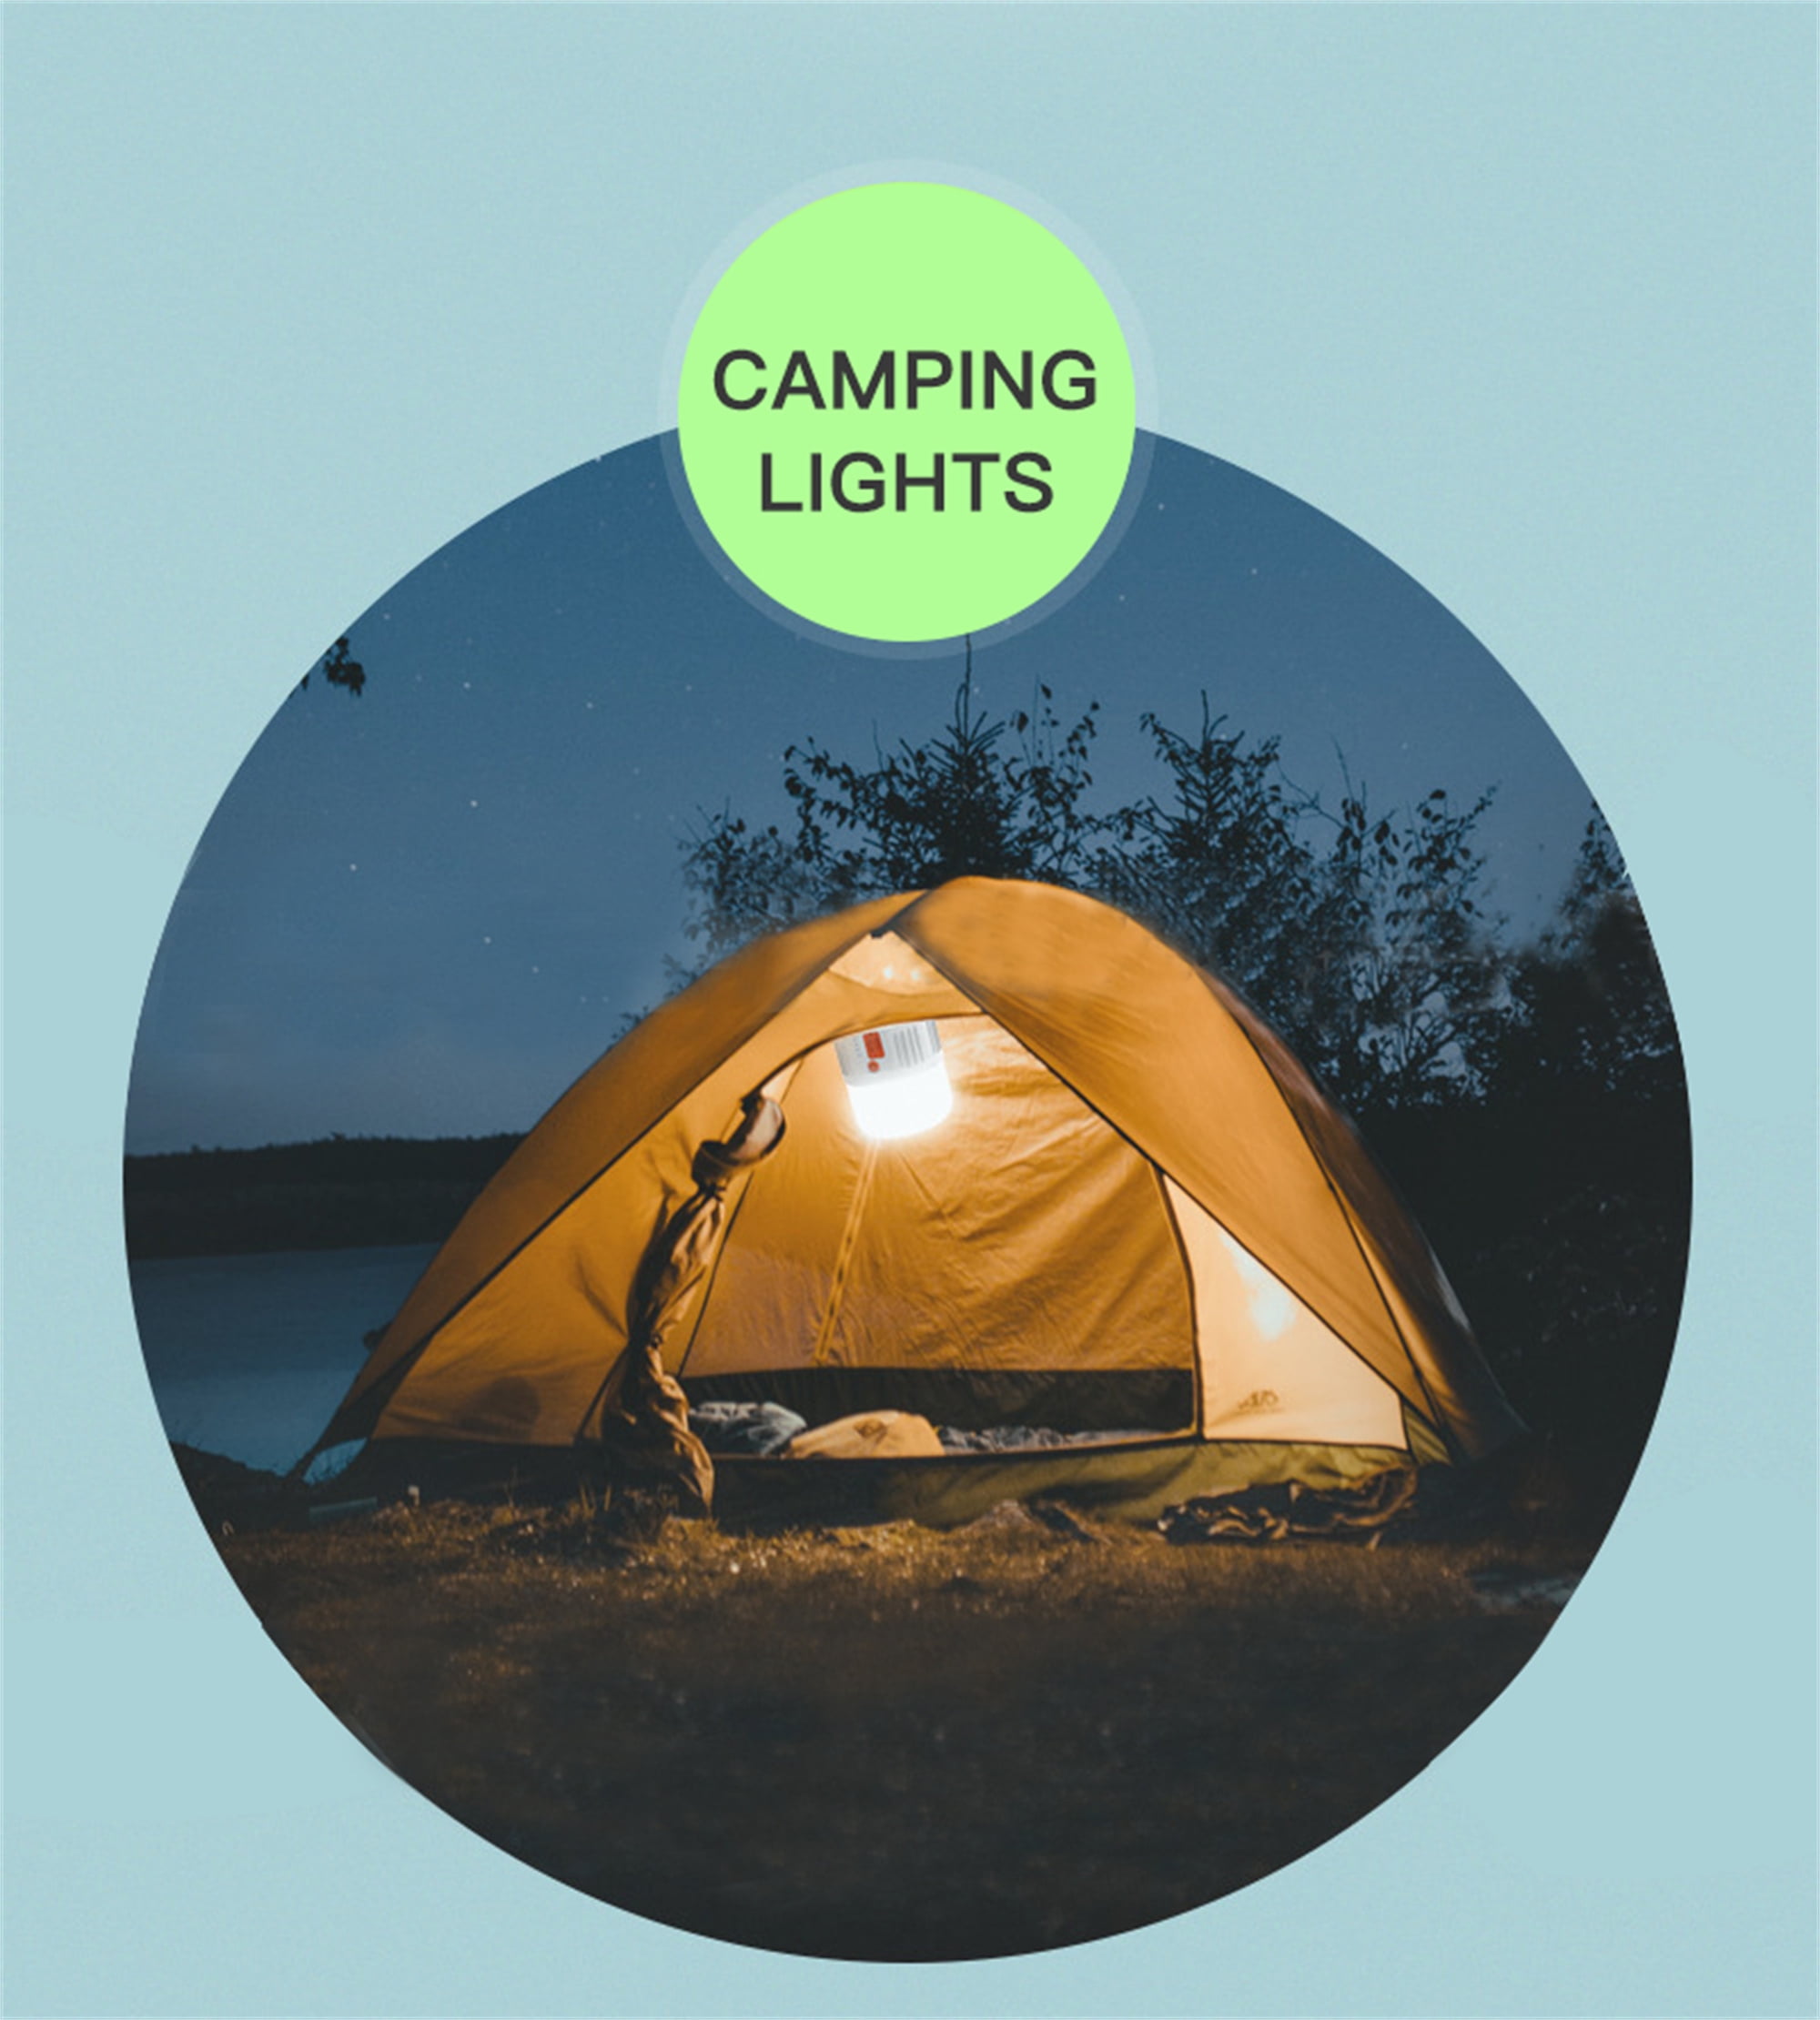 Sdjma Rechargeable Camping Lantern, LED Camping Lights with 4 Light Modes, Lightweight Camp Lamp Phone Charger Portable Lantern Flashlight for Power